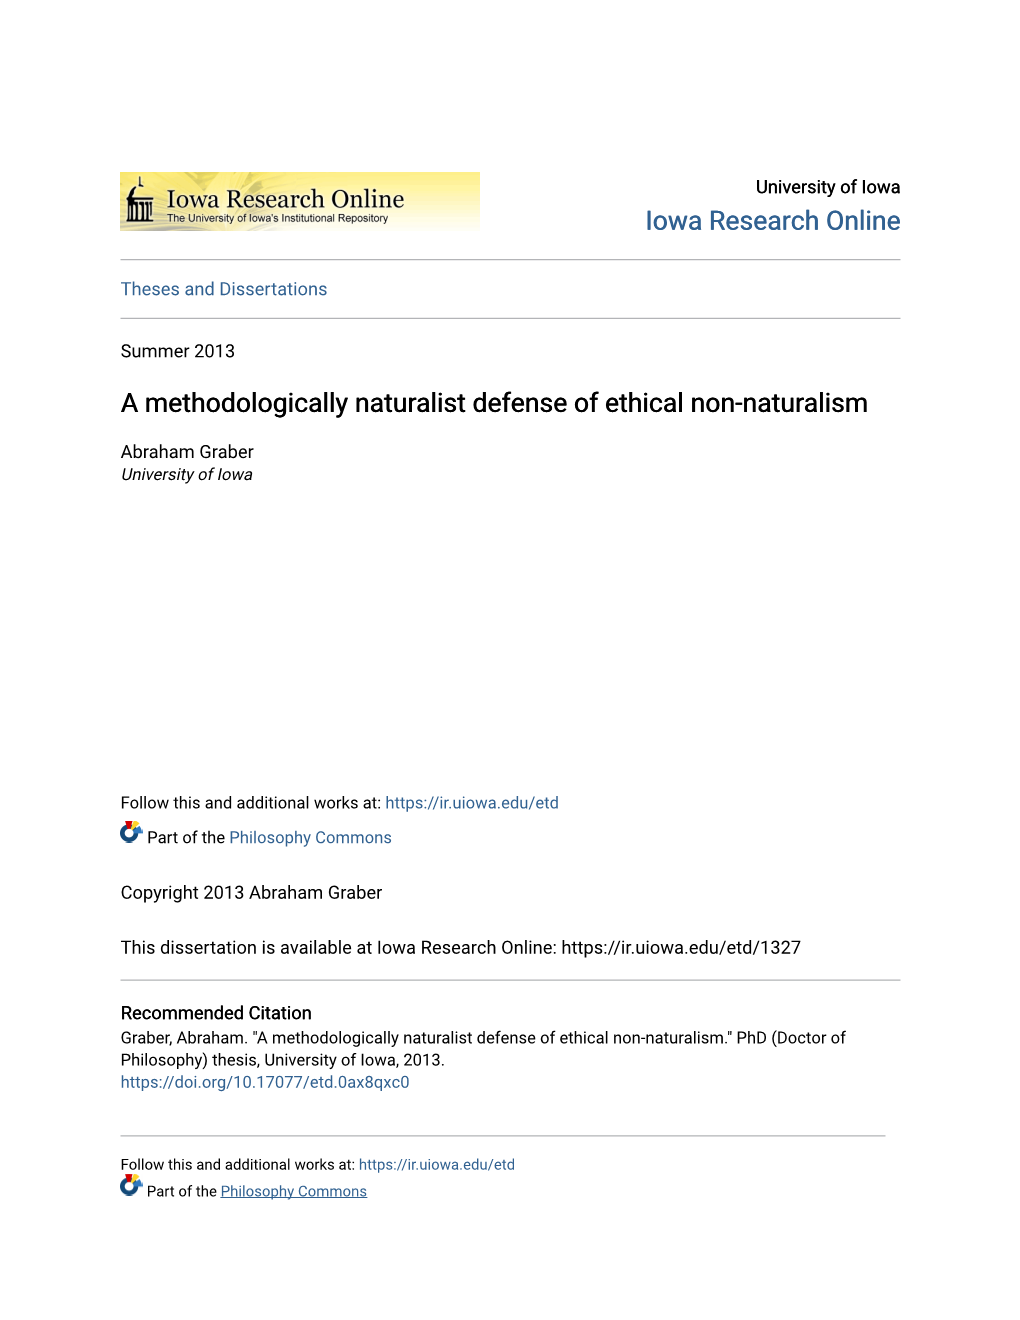 A Methodologically Naturalist Defense of Ethical Non-Naturalism